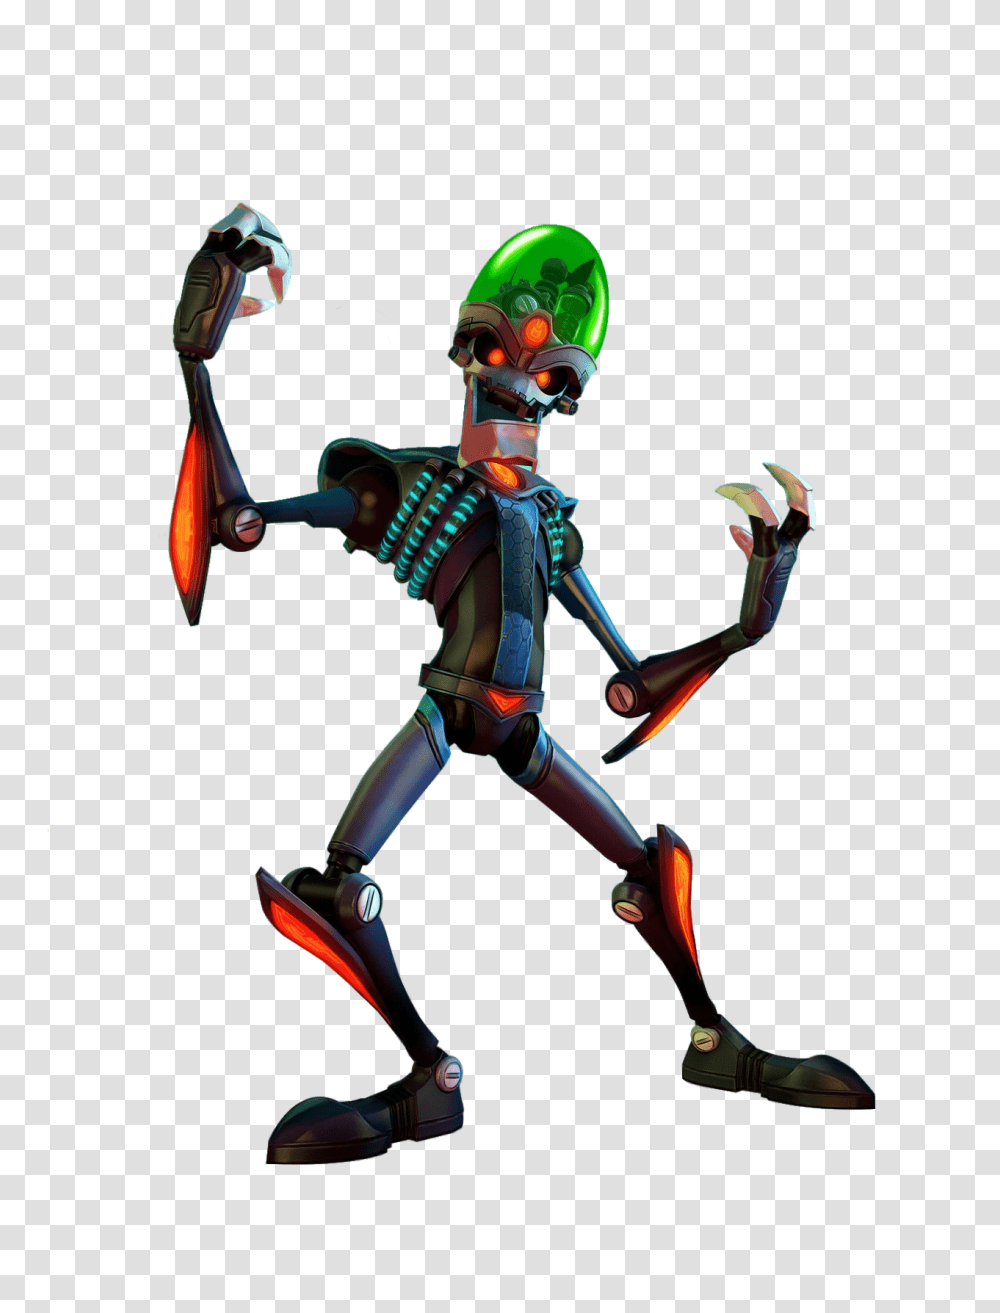 Ratchet And Clank The Movie Theburrowfarm, Costume, Toy, Helmet Transparent Png